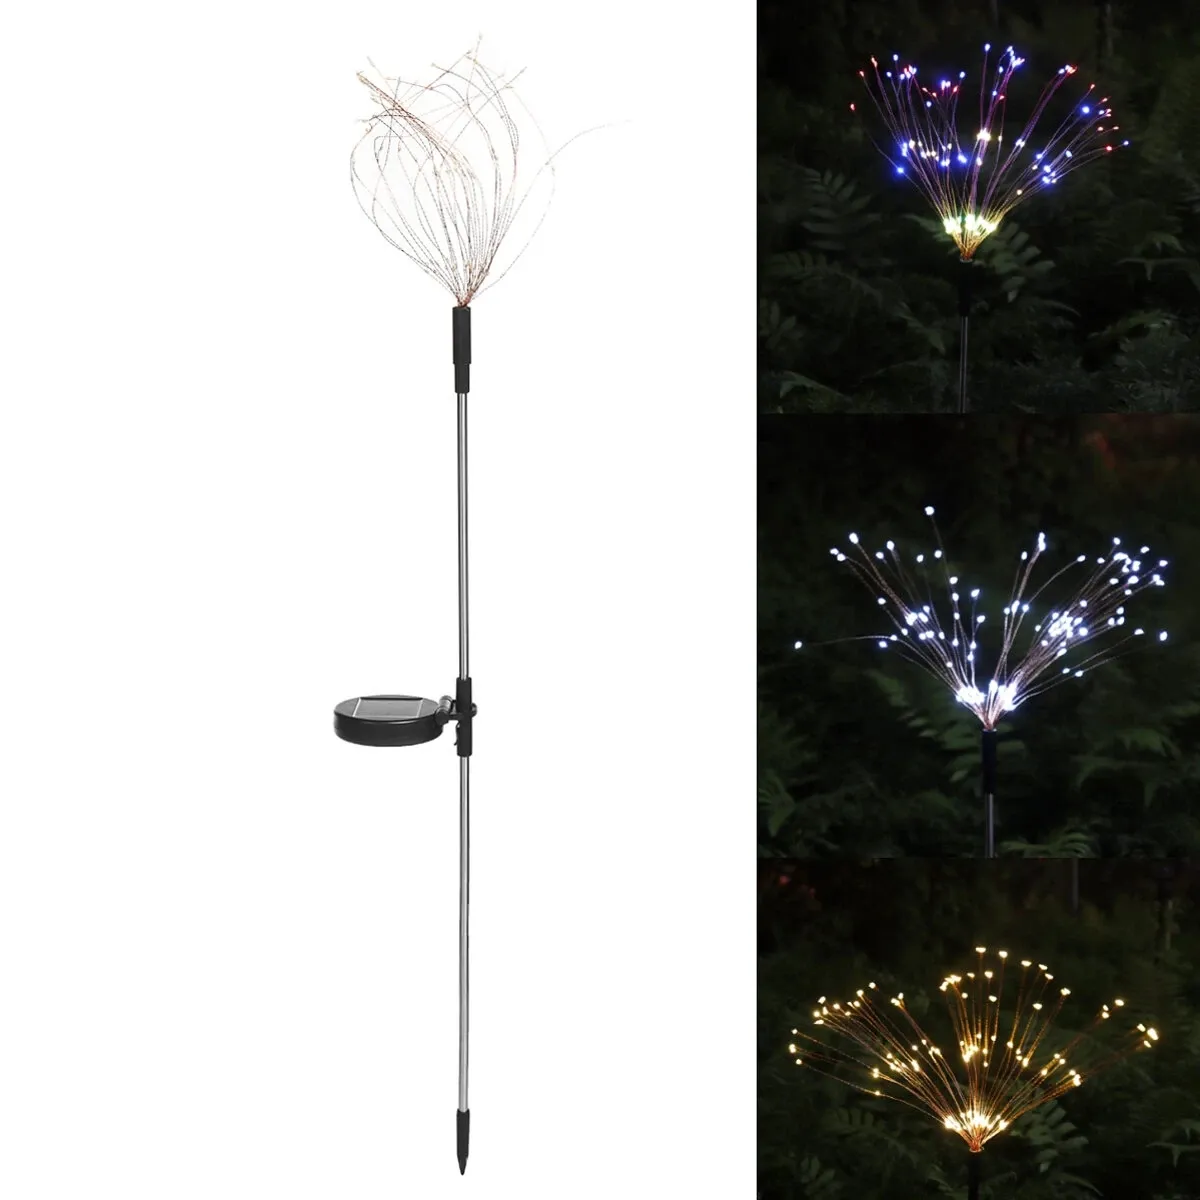 90/120/150 LED 2Modes Solar Garden Lights Powered String with 2 Modes Twinkling and Steady-ON - 90 Warm White